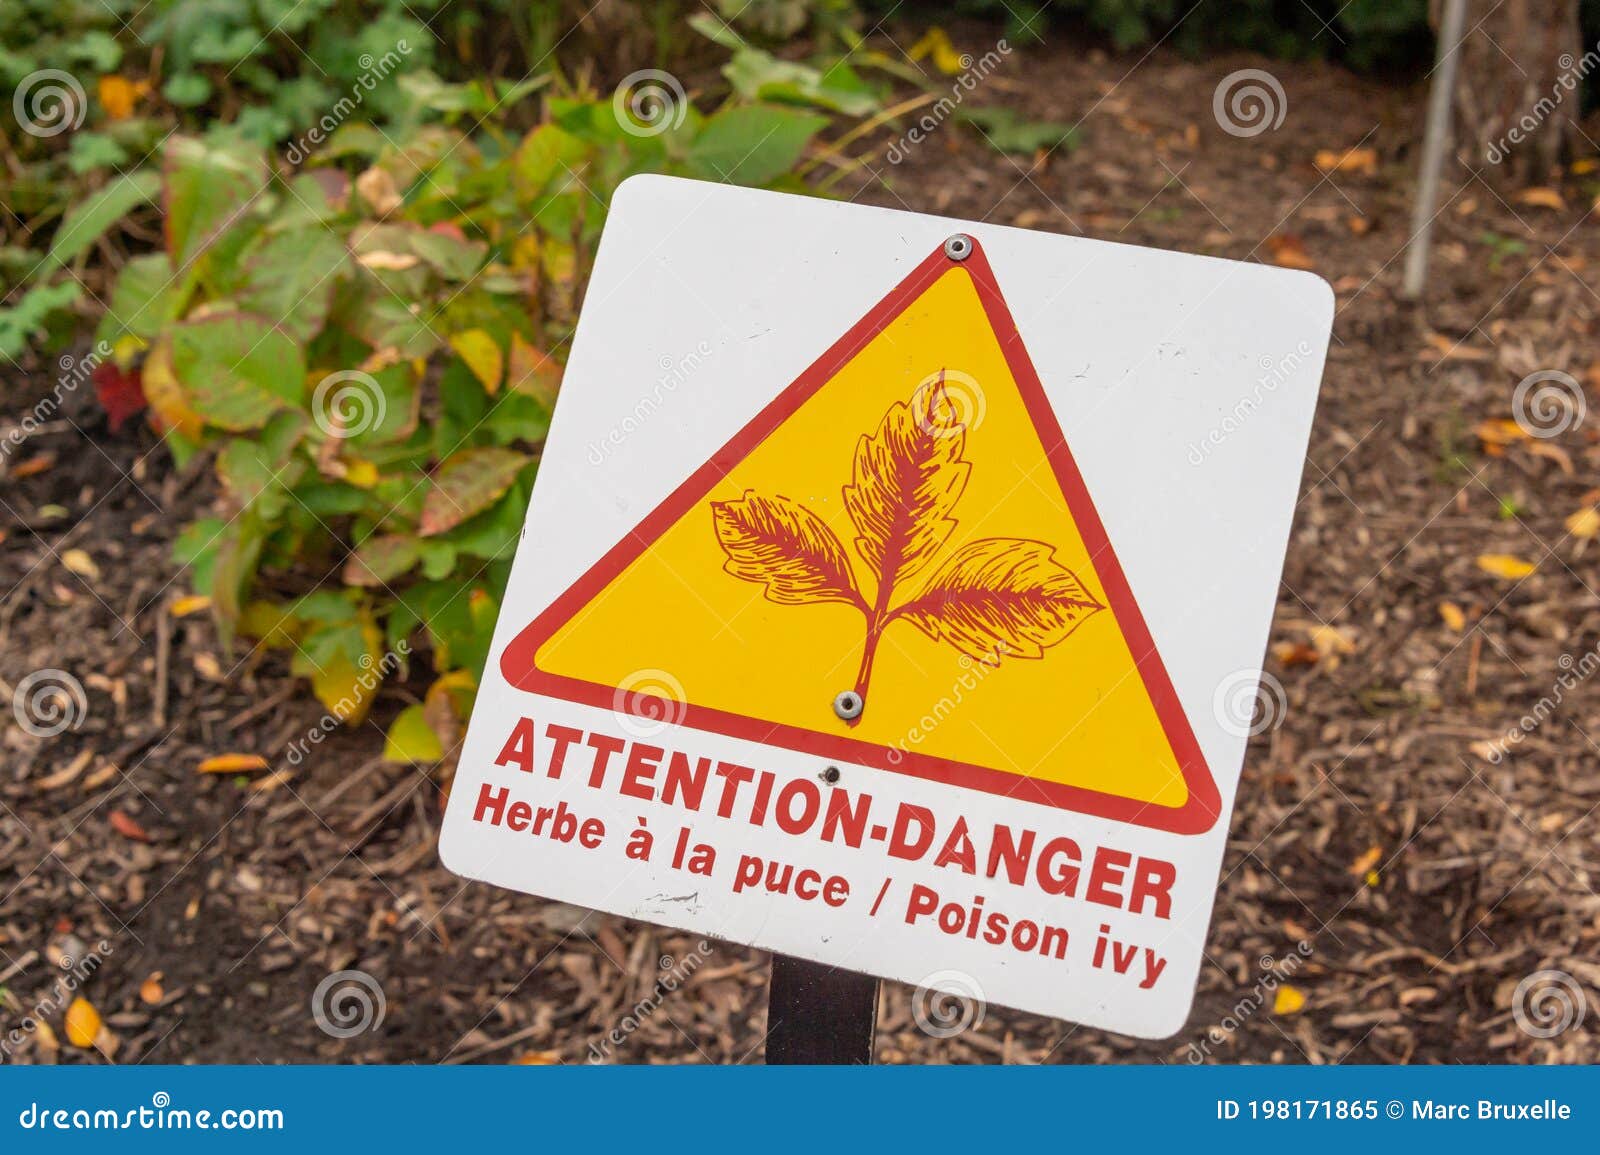 poison ivy warning sign